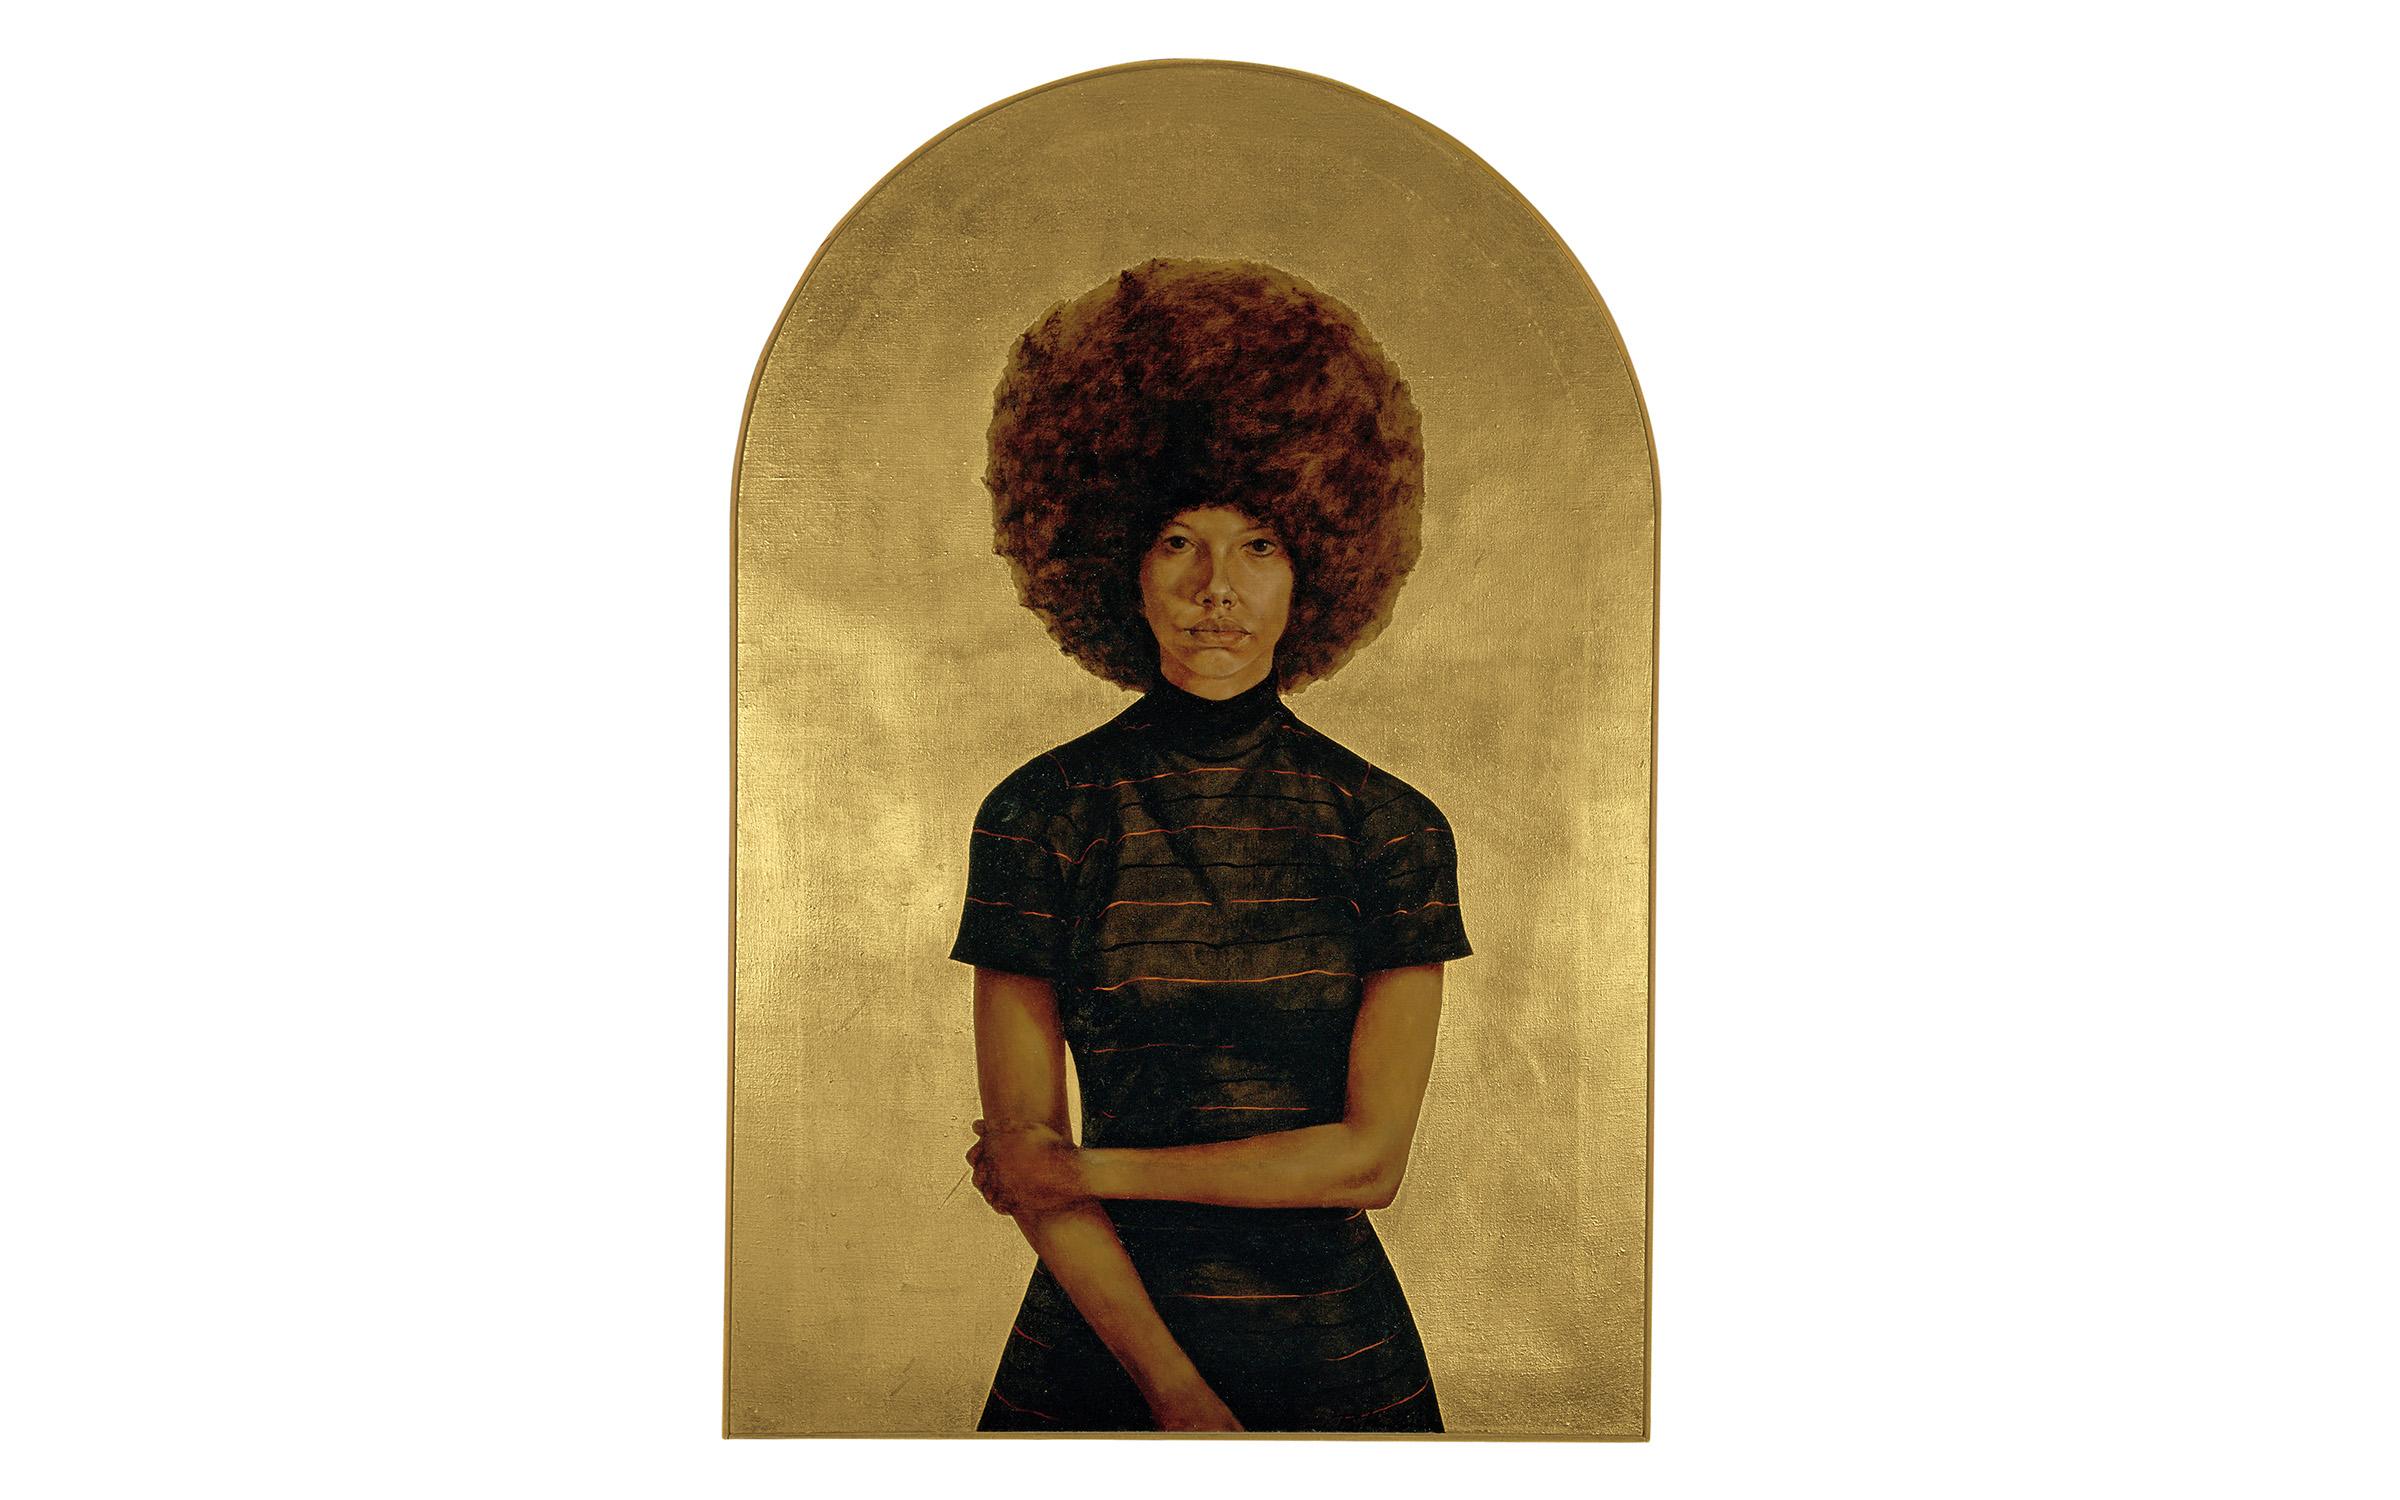 Hendricks, L. Barkley, Lawdy Mama,1969, oil and gold leaf on canvas. Published by The Studio Museum in Harlem, gift of Stuart Liebman, in memory of Joseph B. Liebman, 1983.25. © Estate of Barkley L. Hendricks.